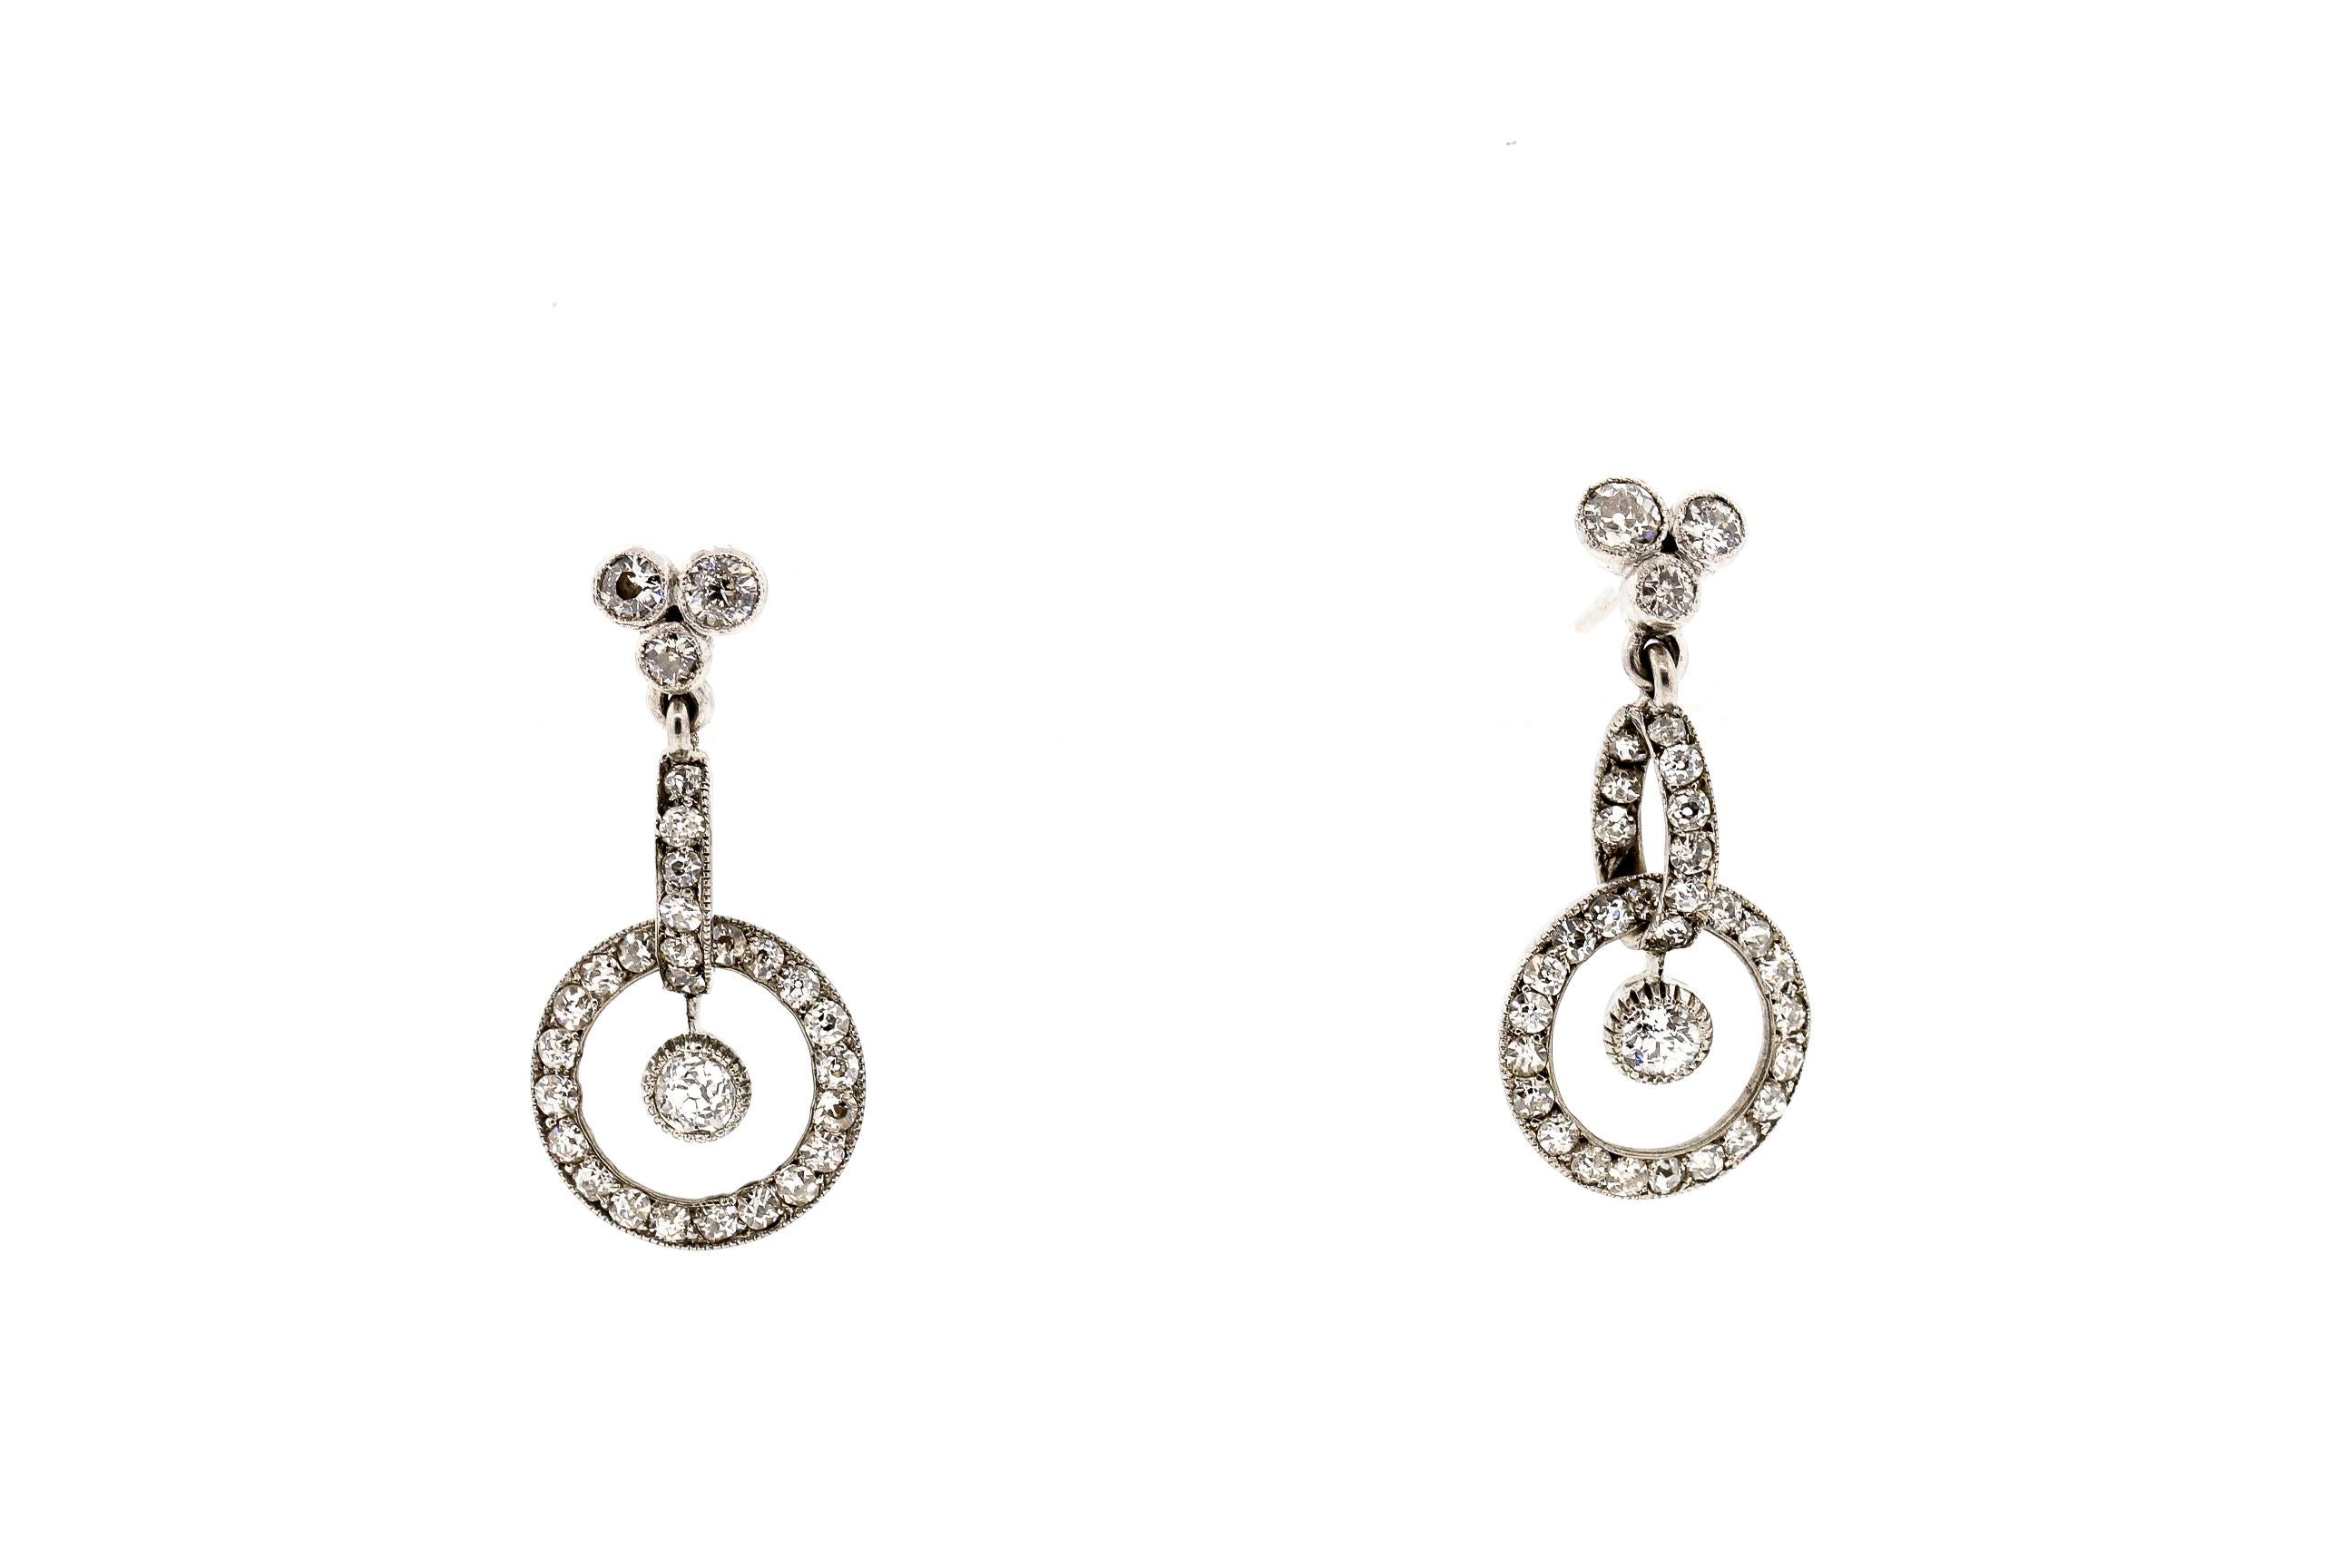 Early 20th Century platinum diamond earrings, circa 1910. These earrings are a pretty design, with a trefoil on top and two connecting dimensional loops on the bottom. They are set with 64 old European and single cut diamonds weighing approximately